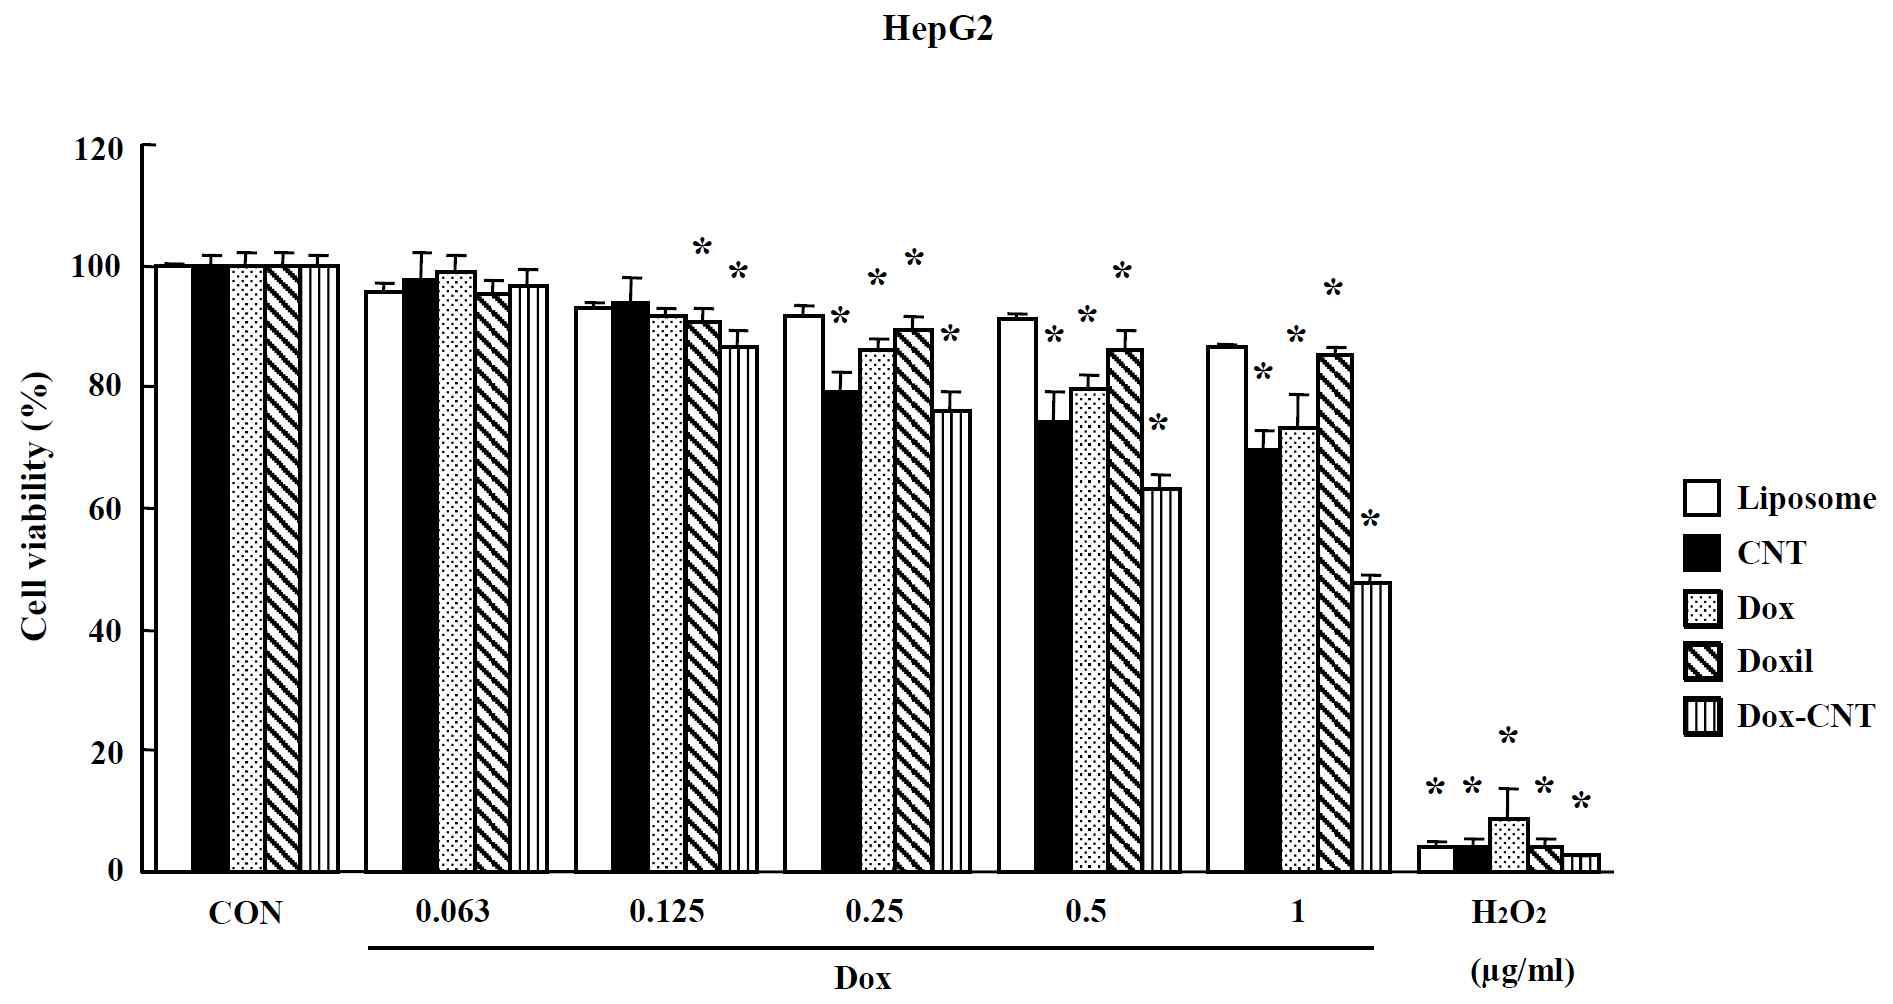 Effects of nano-anticancer drugs on MTT assay in HepG2 cells. Cells were treated with drugs for 24 hr. Data are shown as means ± SE (n = 5). * p<0.05, significantly different from the control